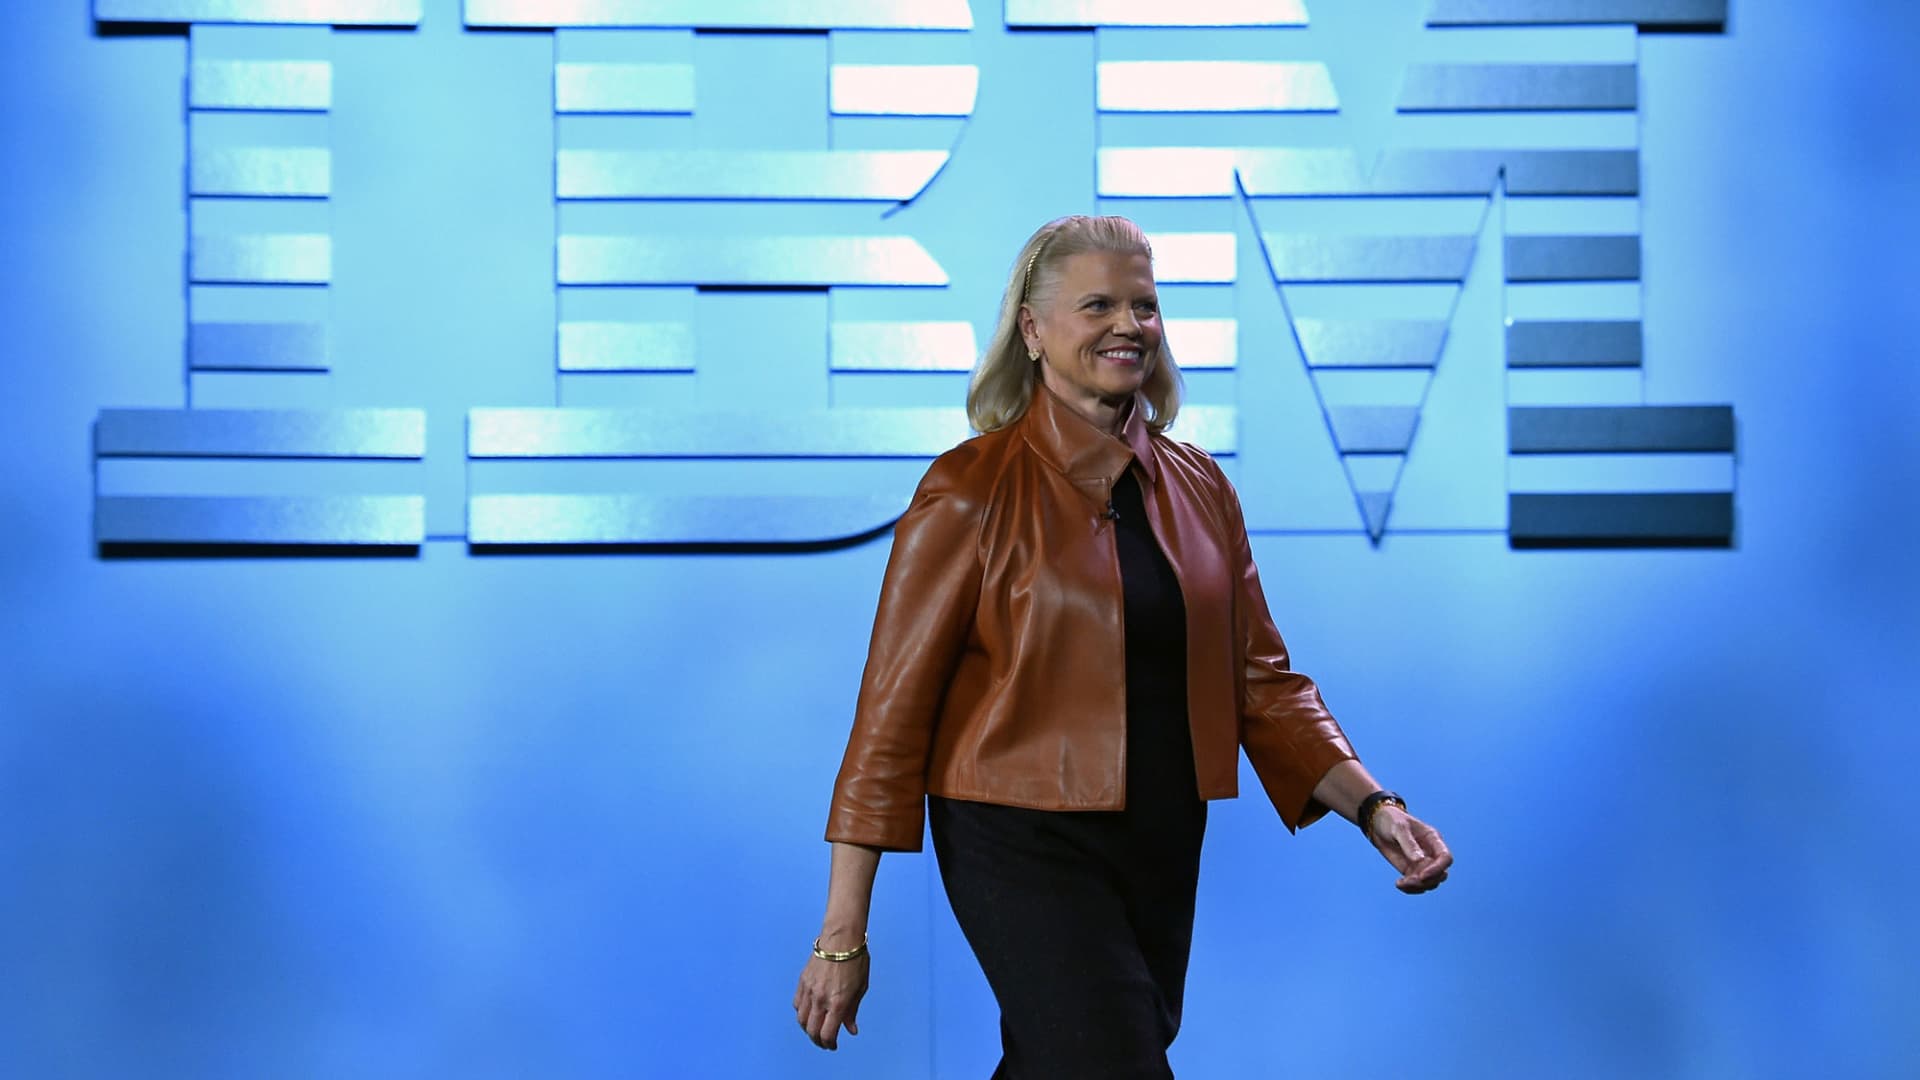 IBM to acquire Red Hat in deal valued at $34 billion